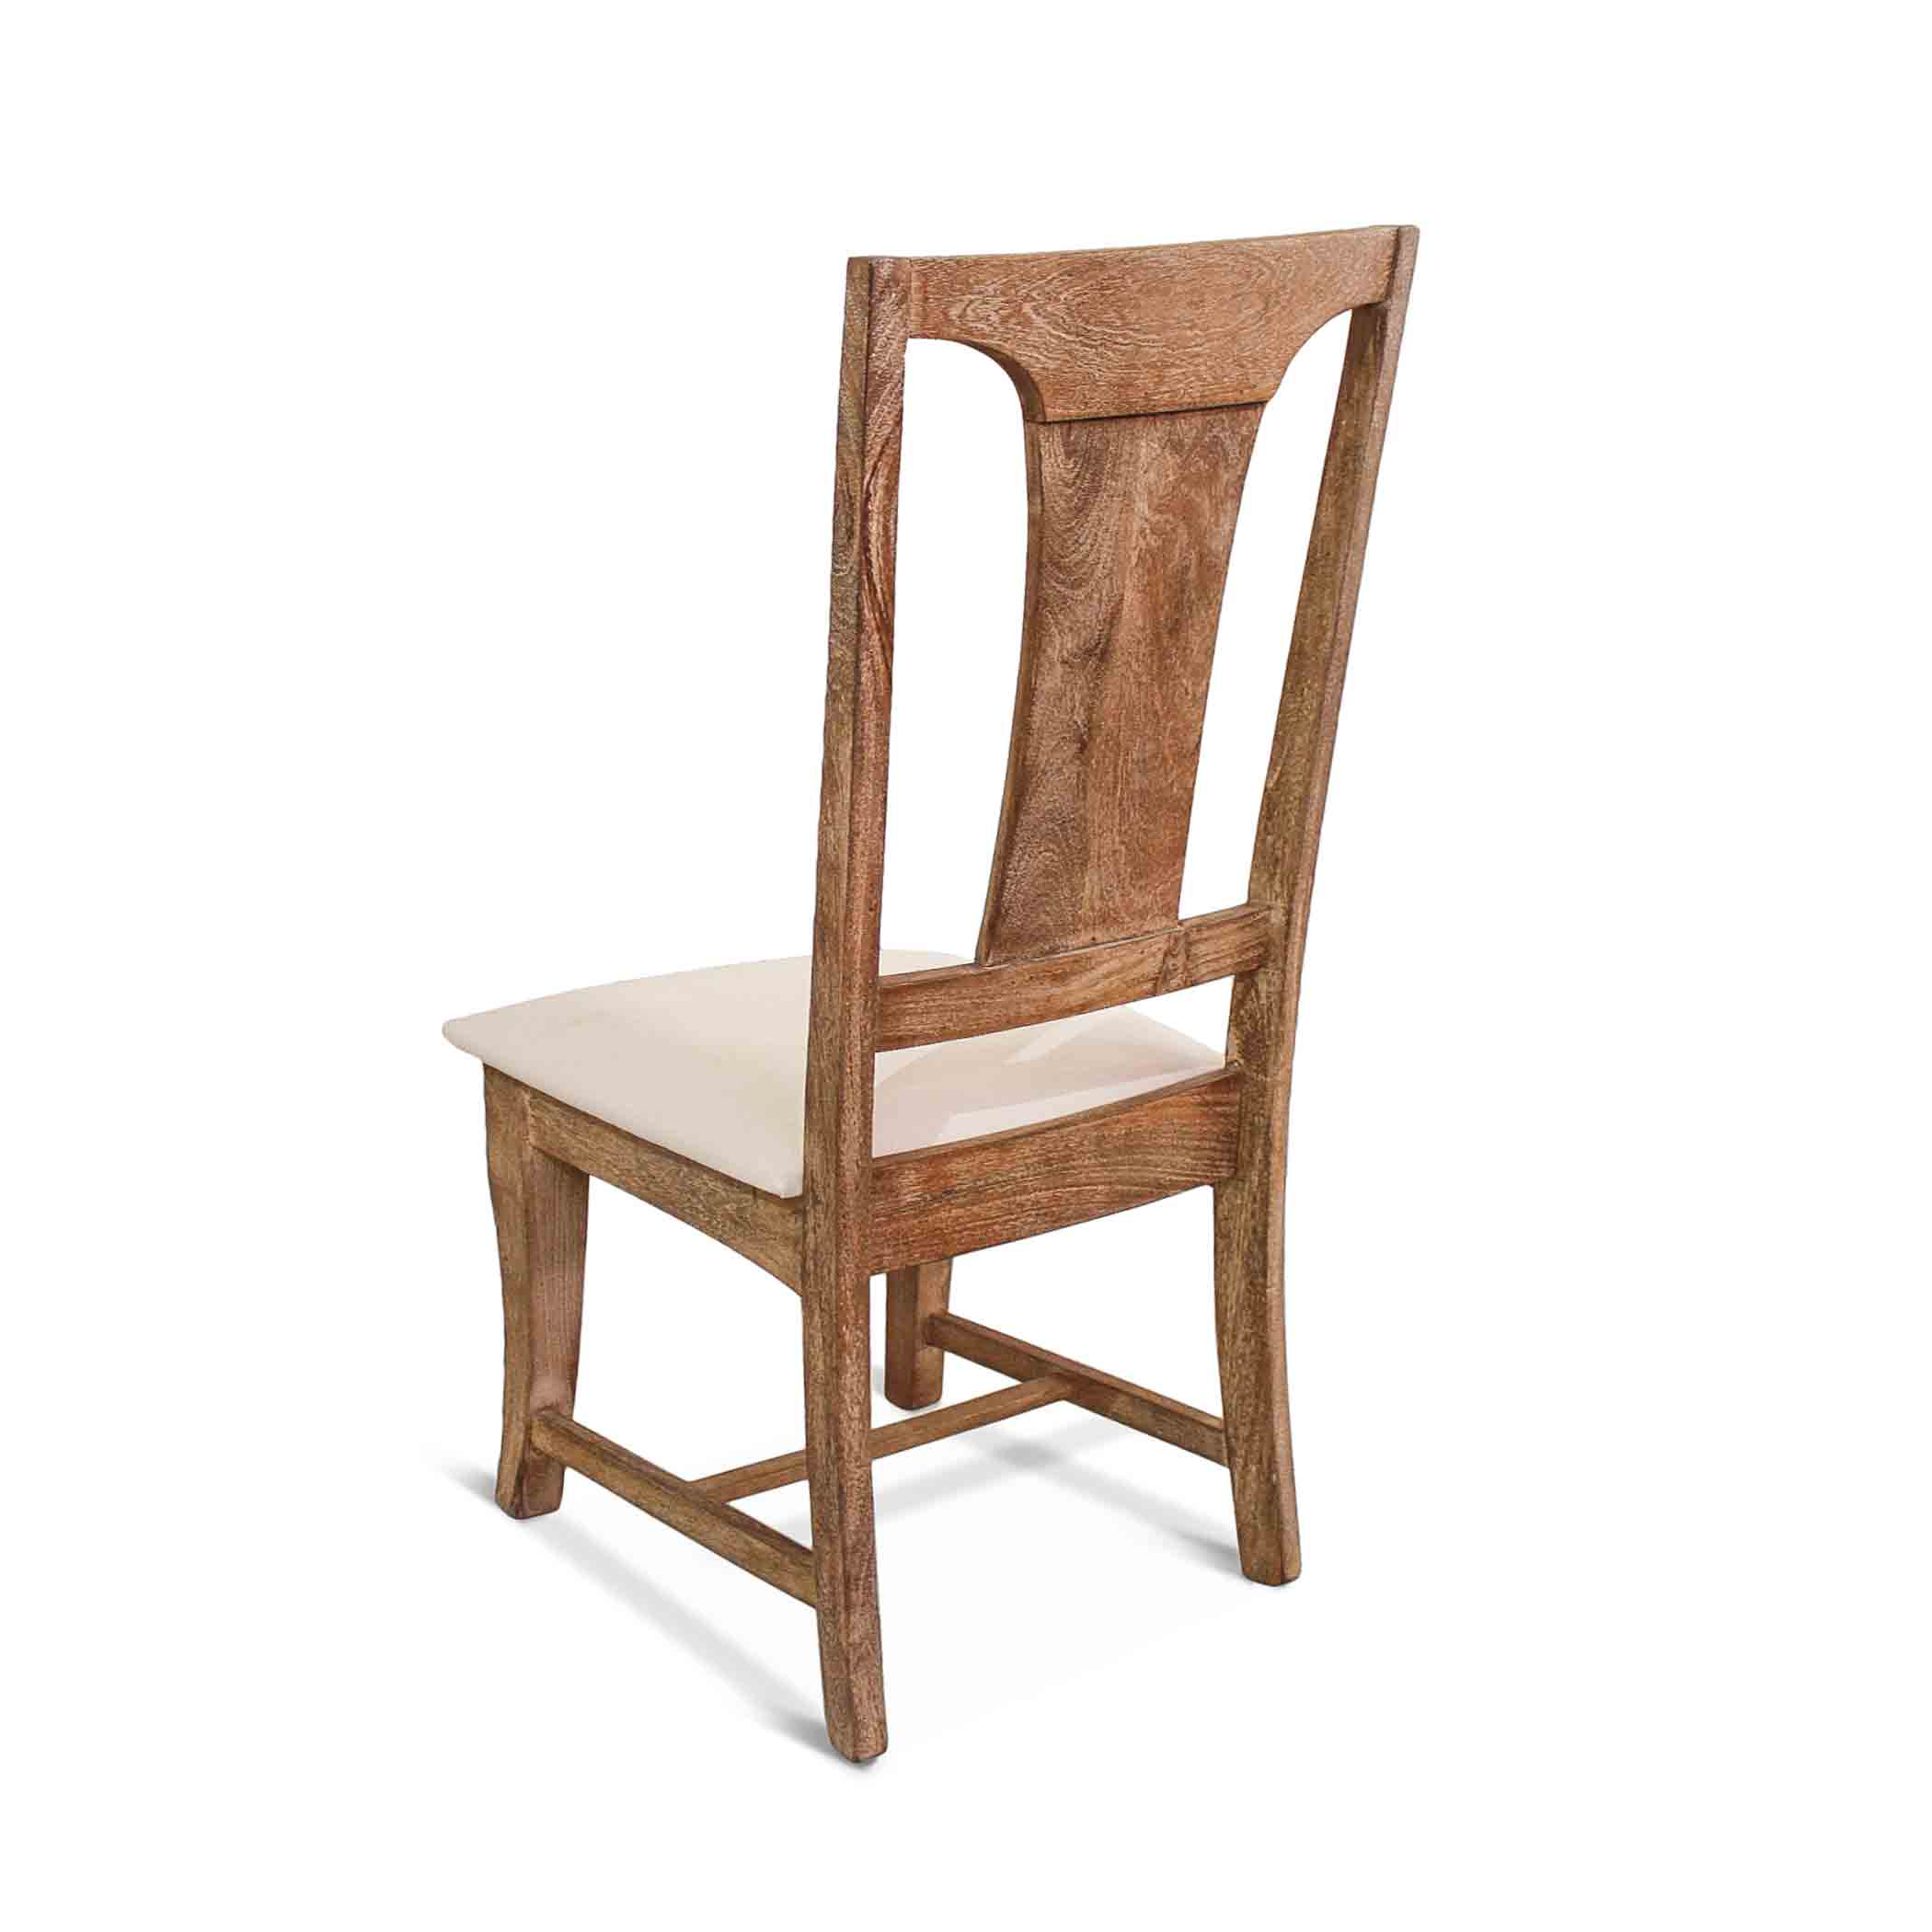 Pengrove Upholstered Dining Chairs, Pair